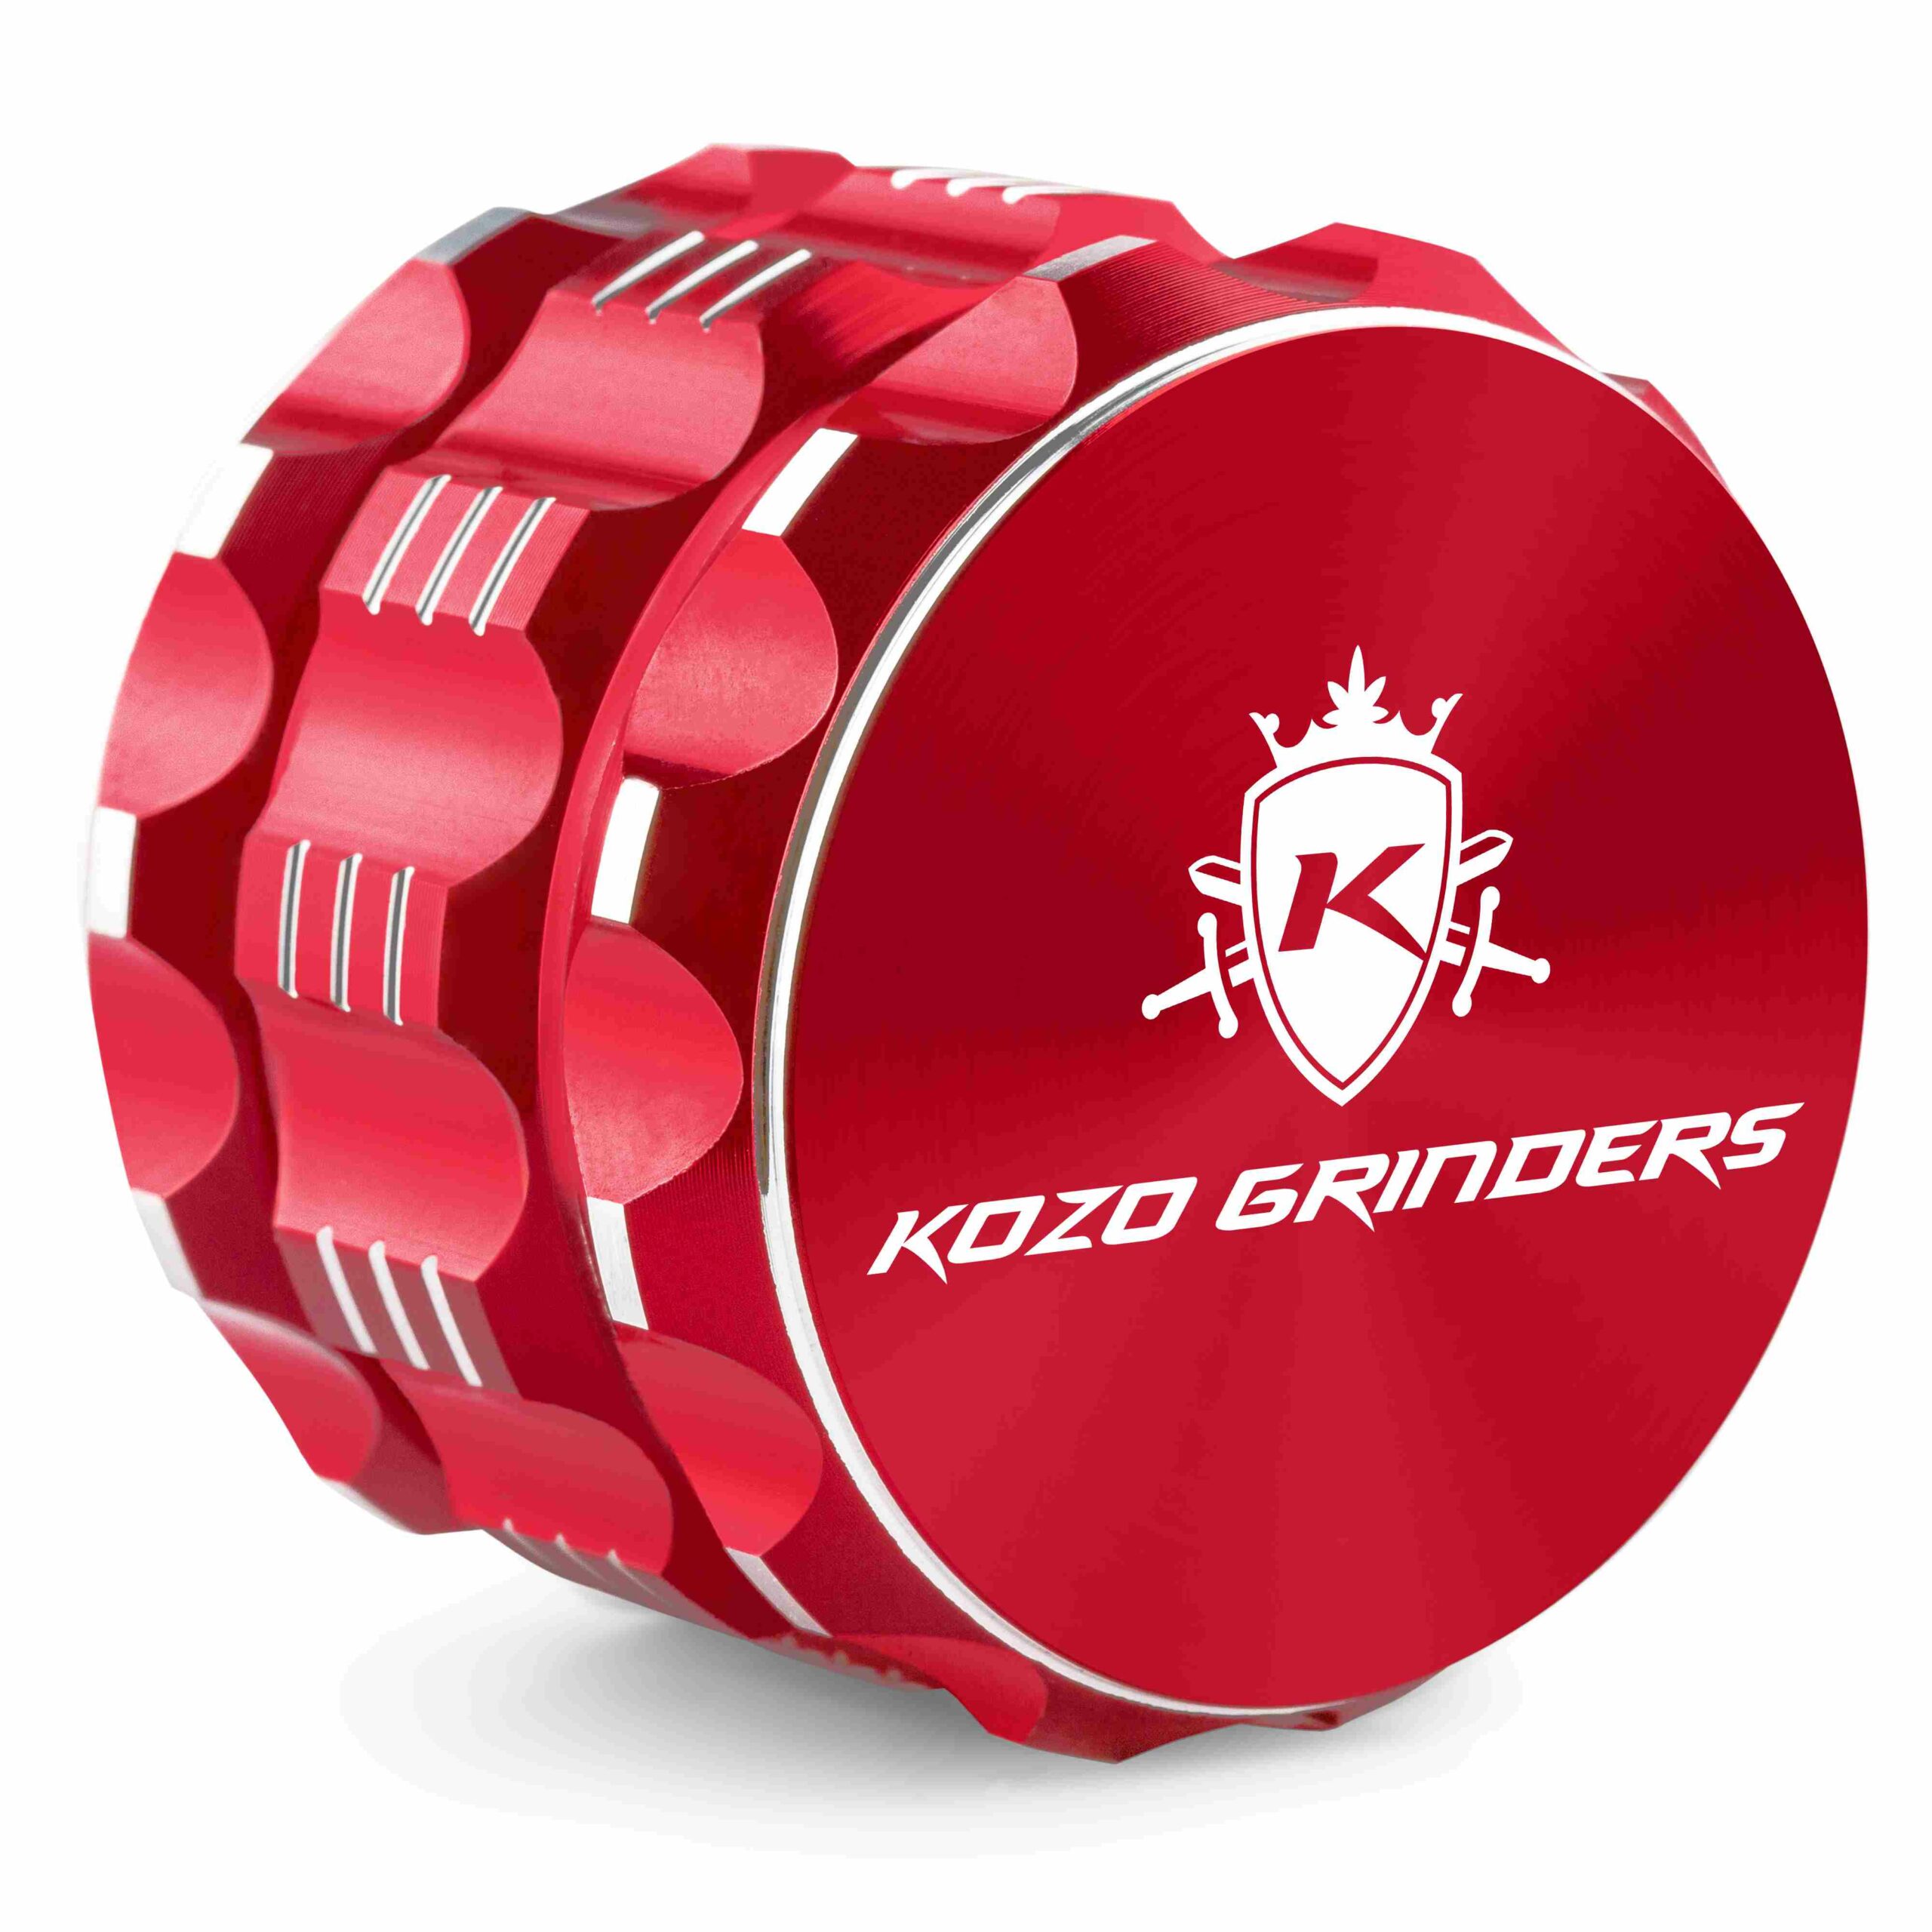 2 inch red grinder - closed and laid on its side